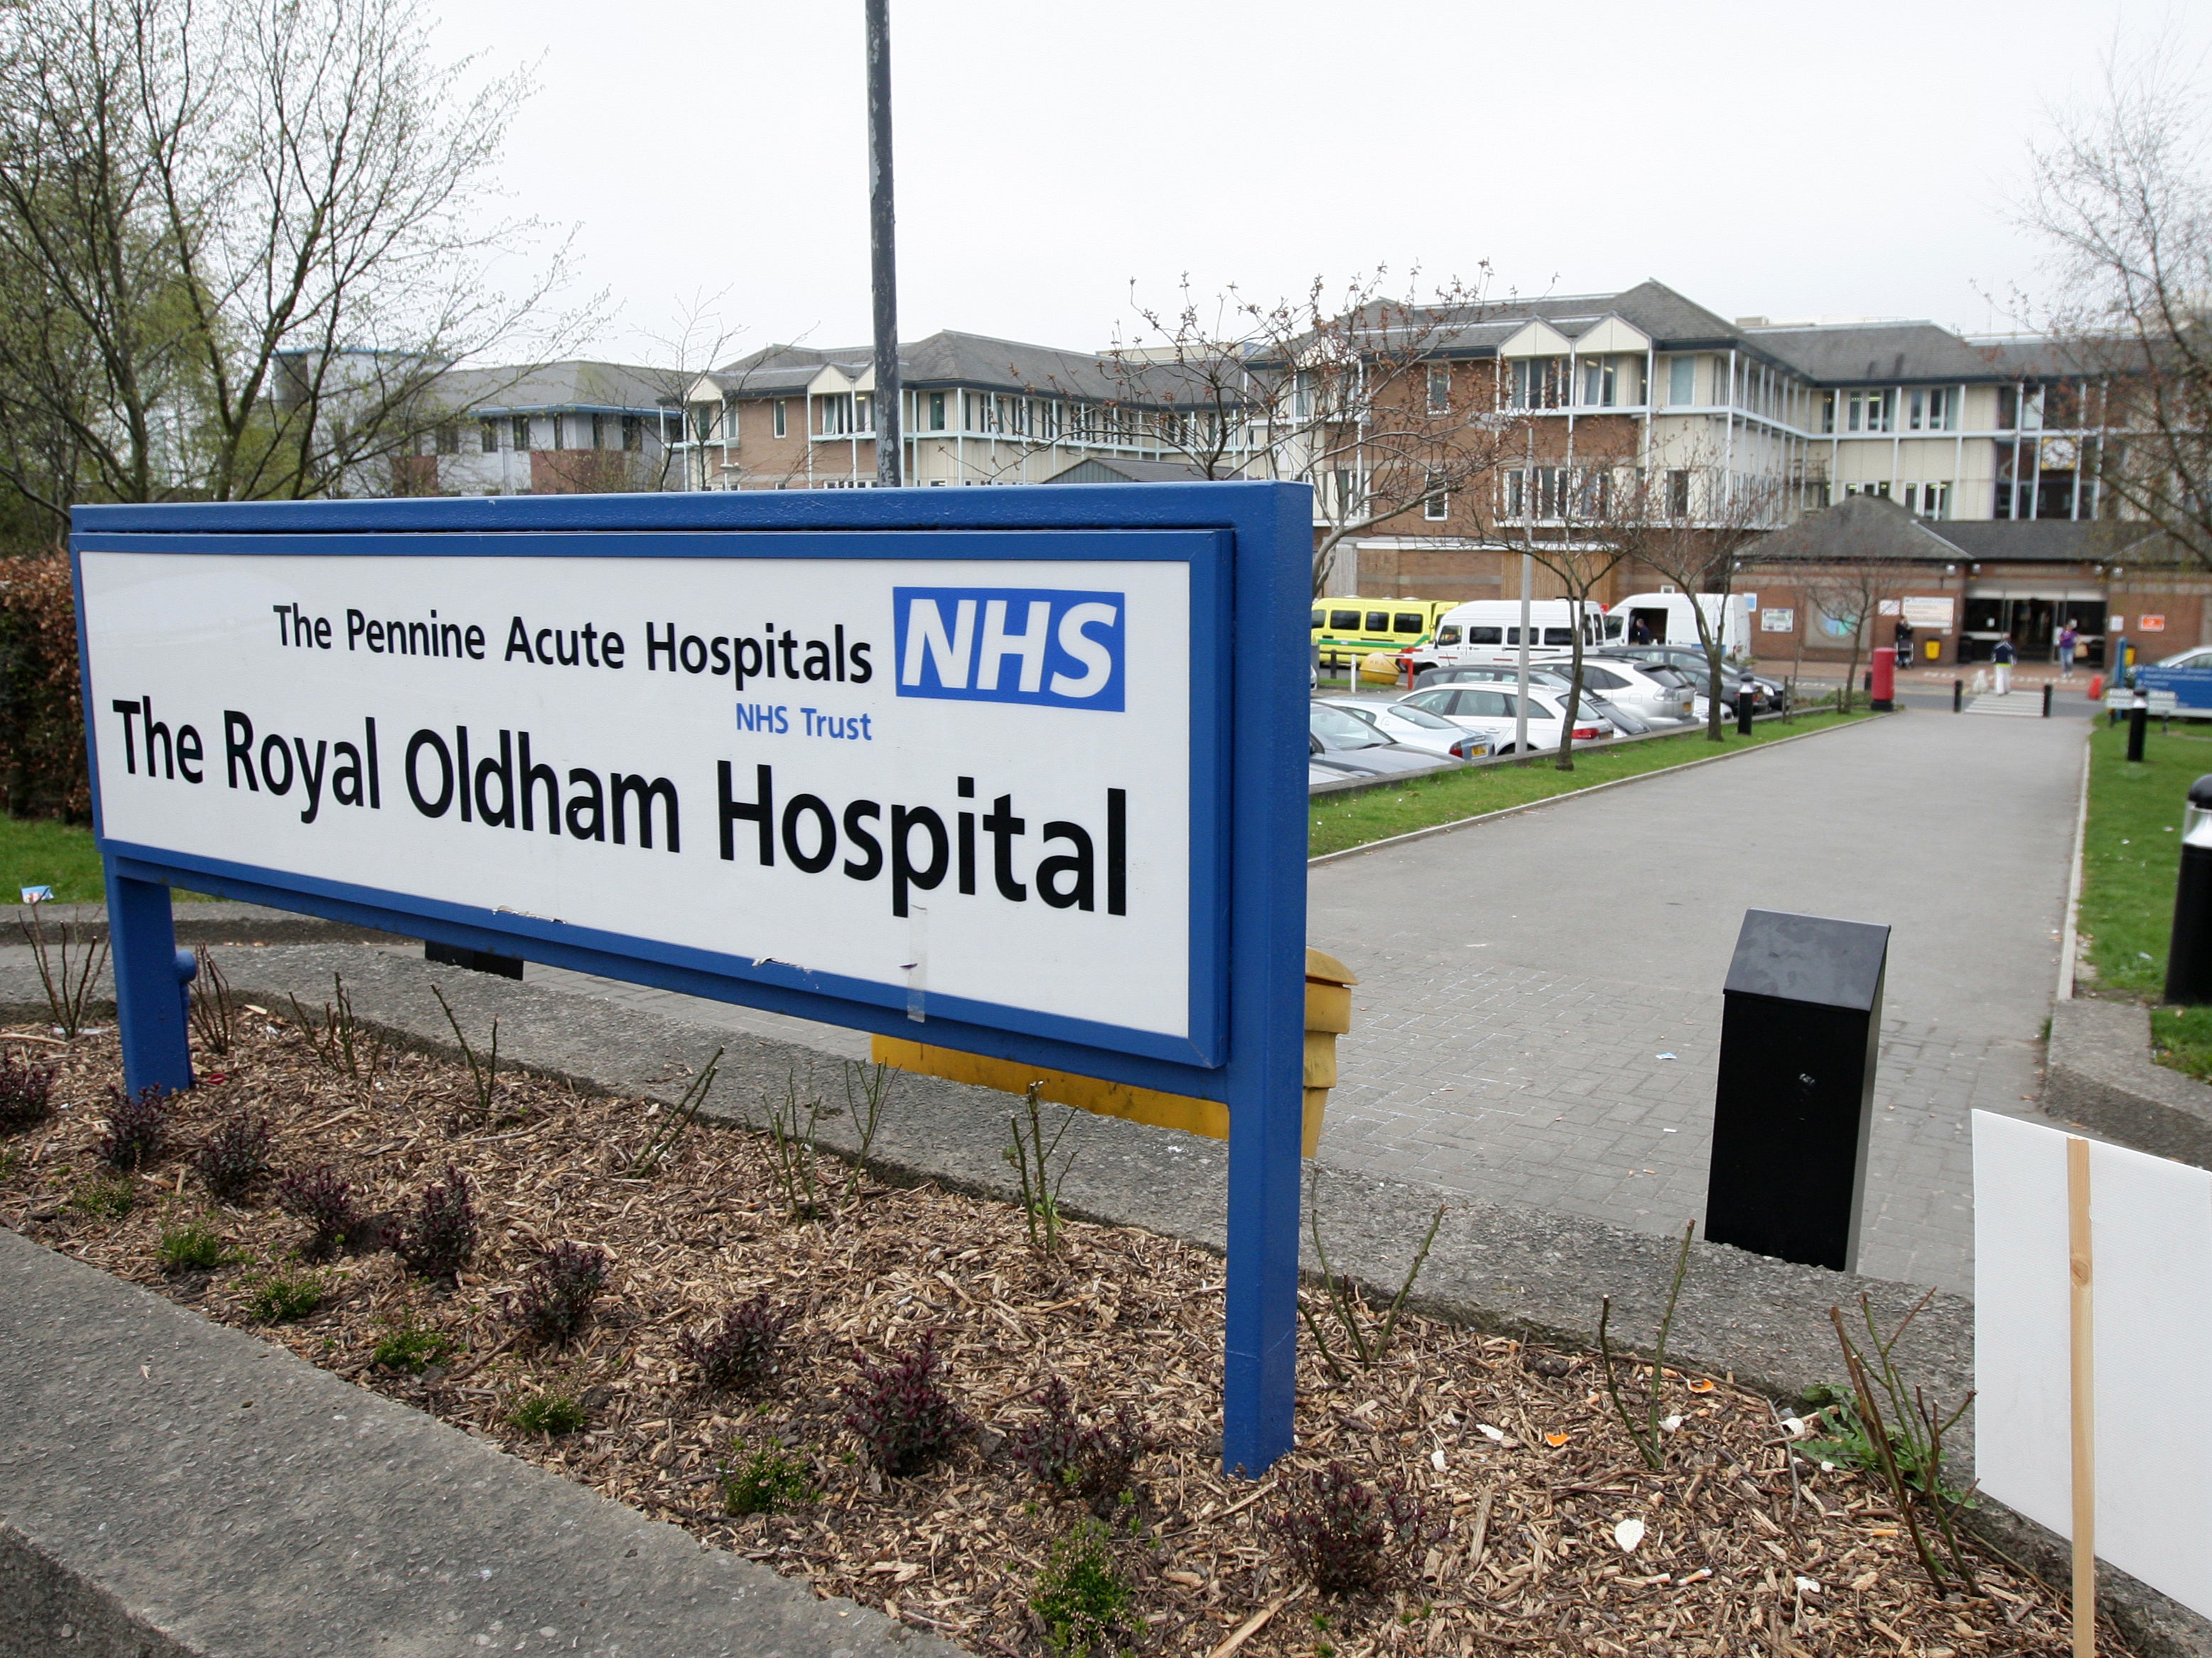 The CQC visited the hospital in November